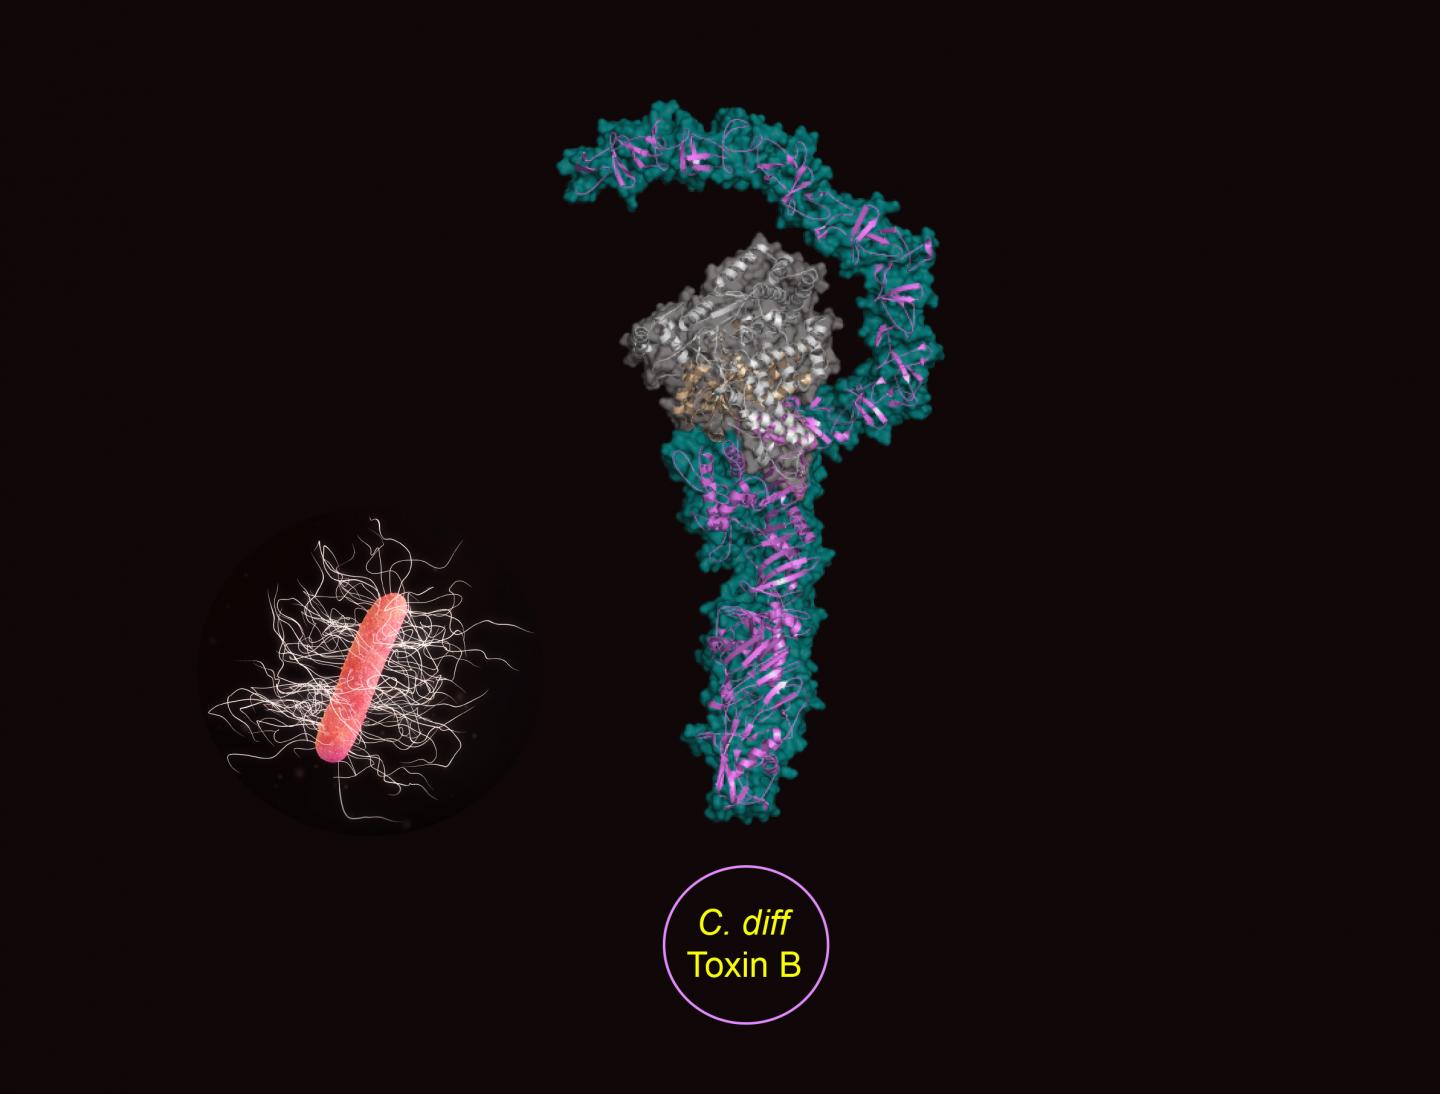 3D Crystal Structure of C. diff Toxin B